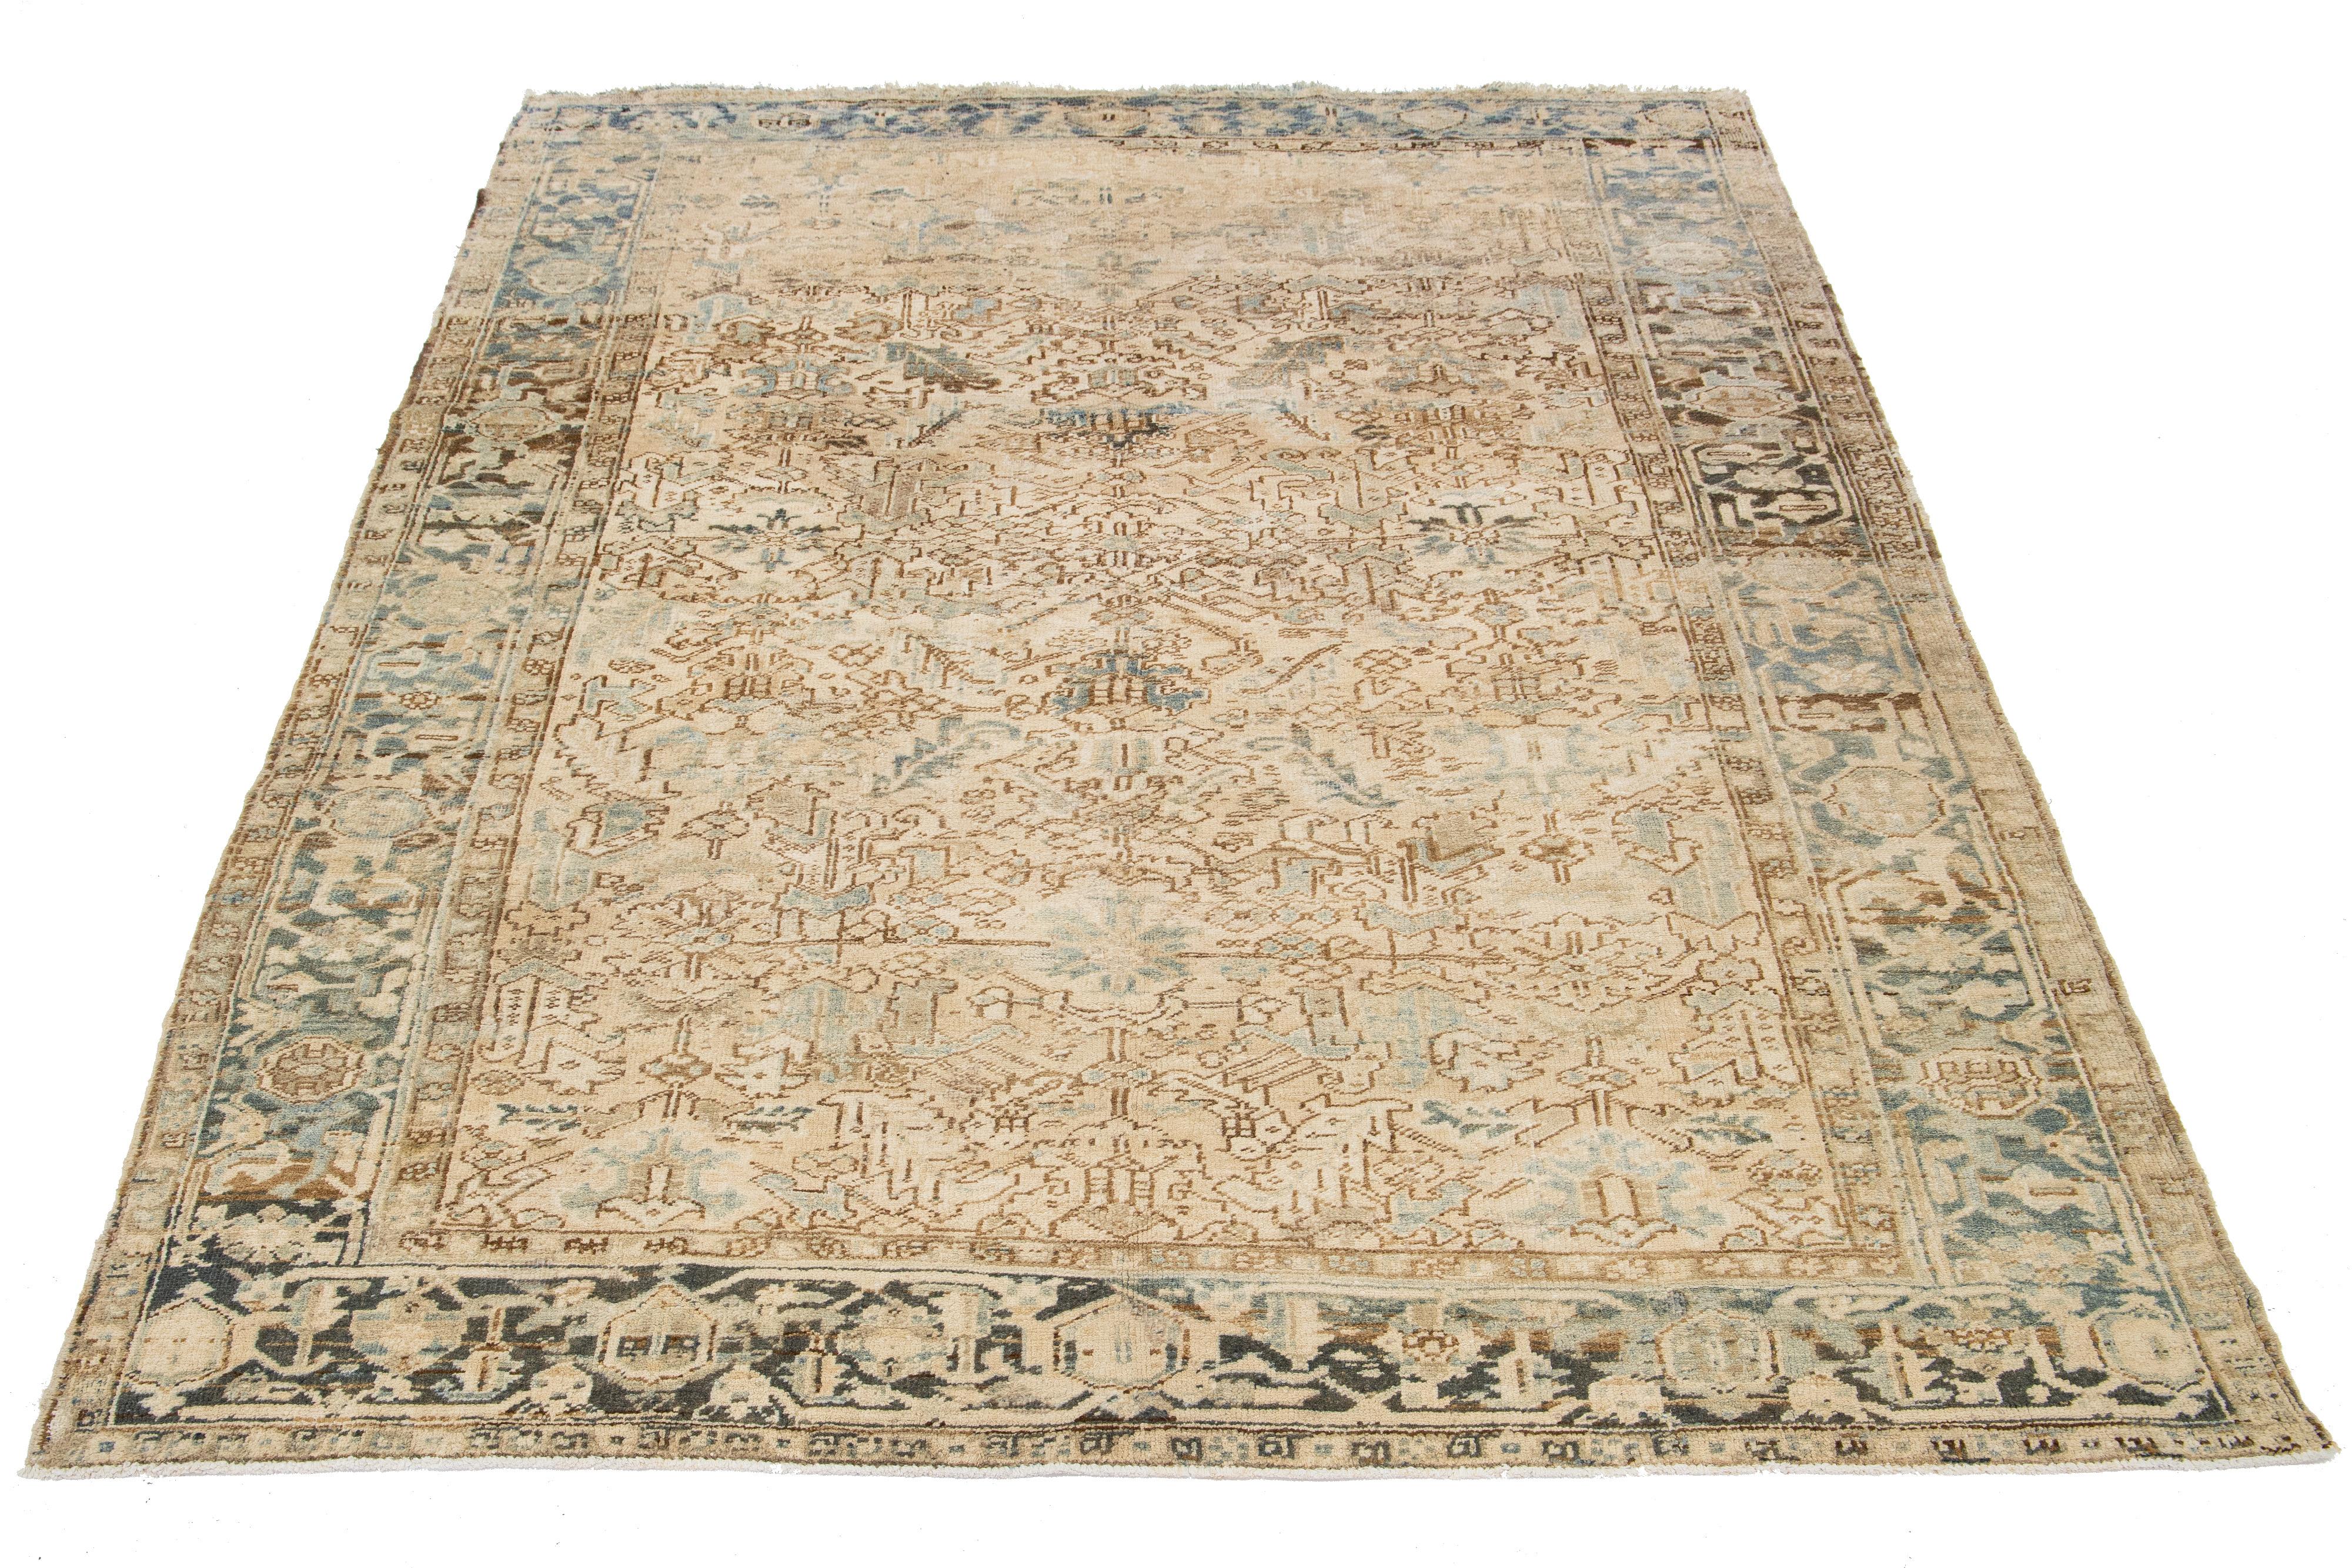 This antique Persian Heriz rug is crafted from hand-knotted wool. It features a captivating allover pattern in shades of blue and light brown on a beige field.

This rug measures 7'8' x 11'1